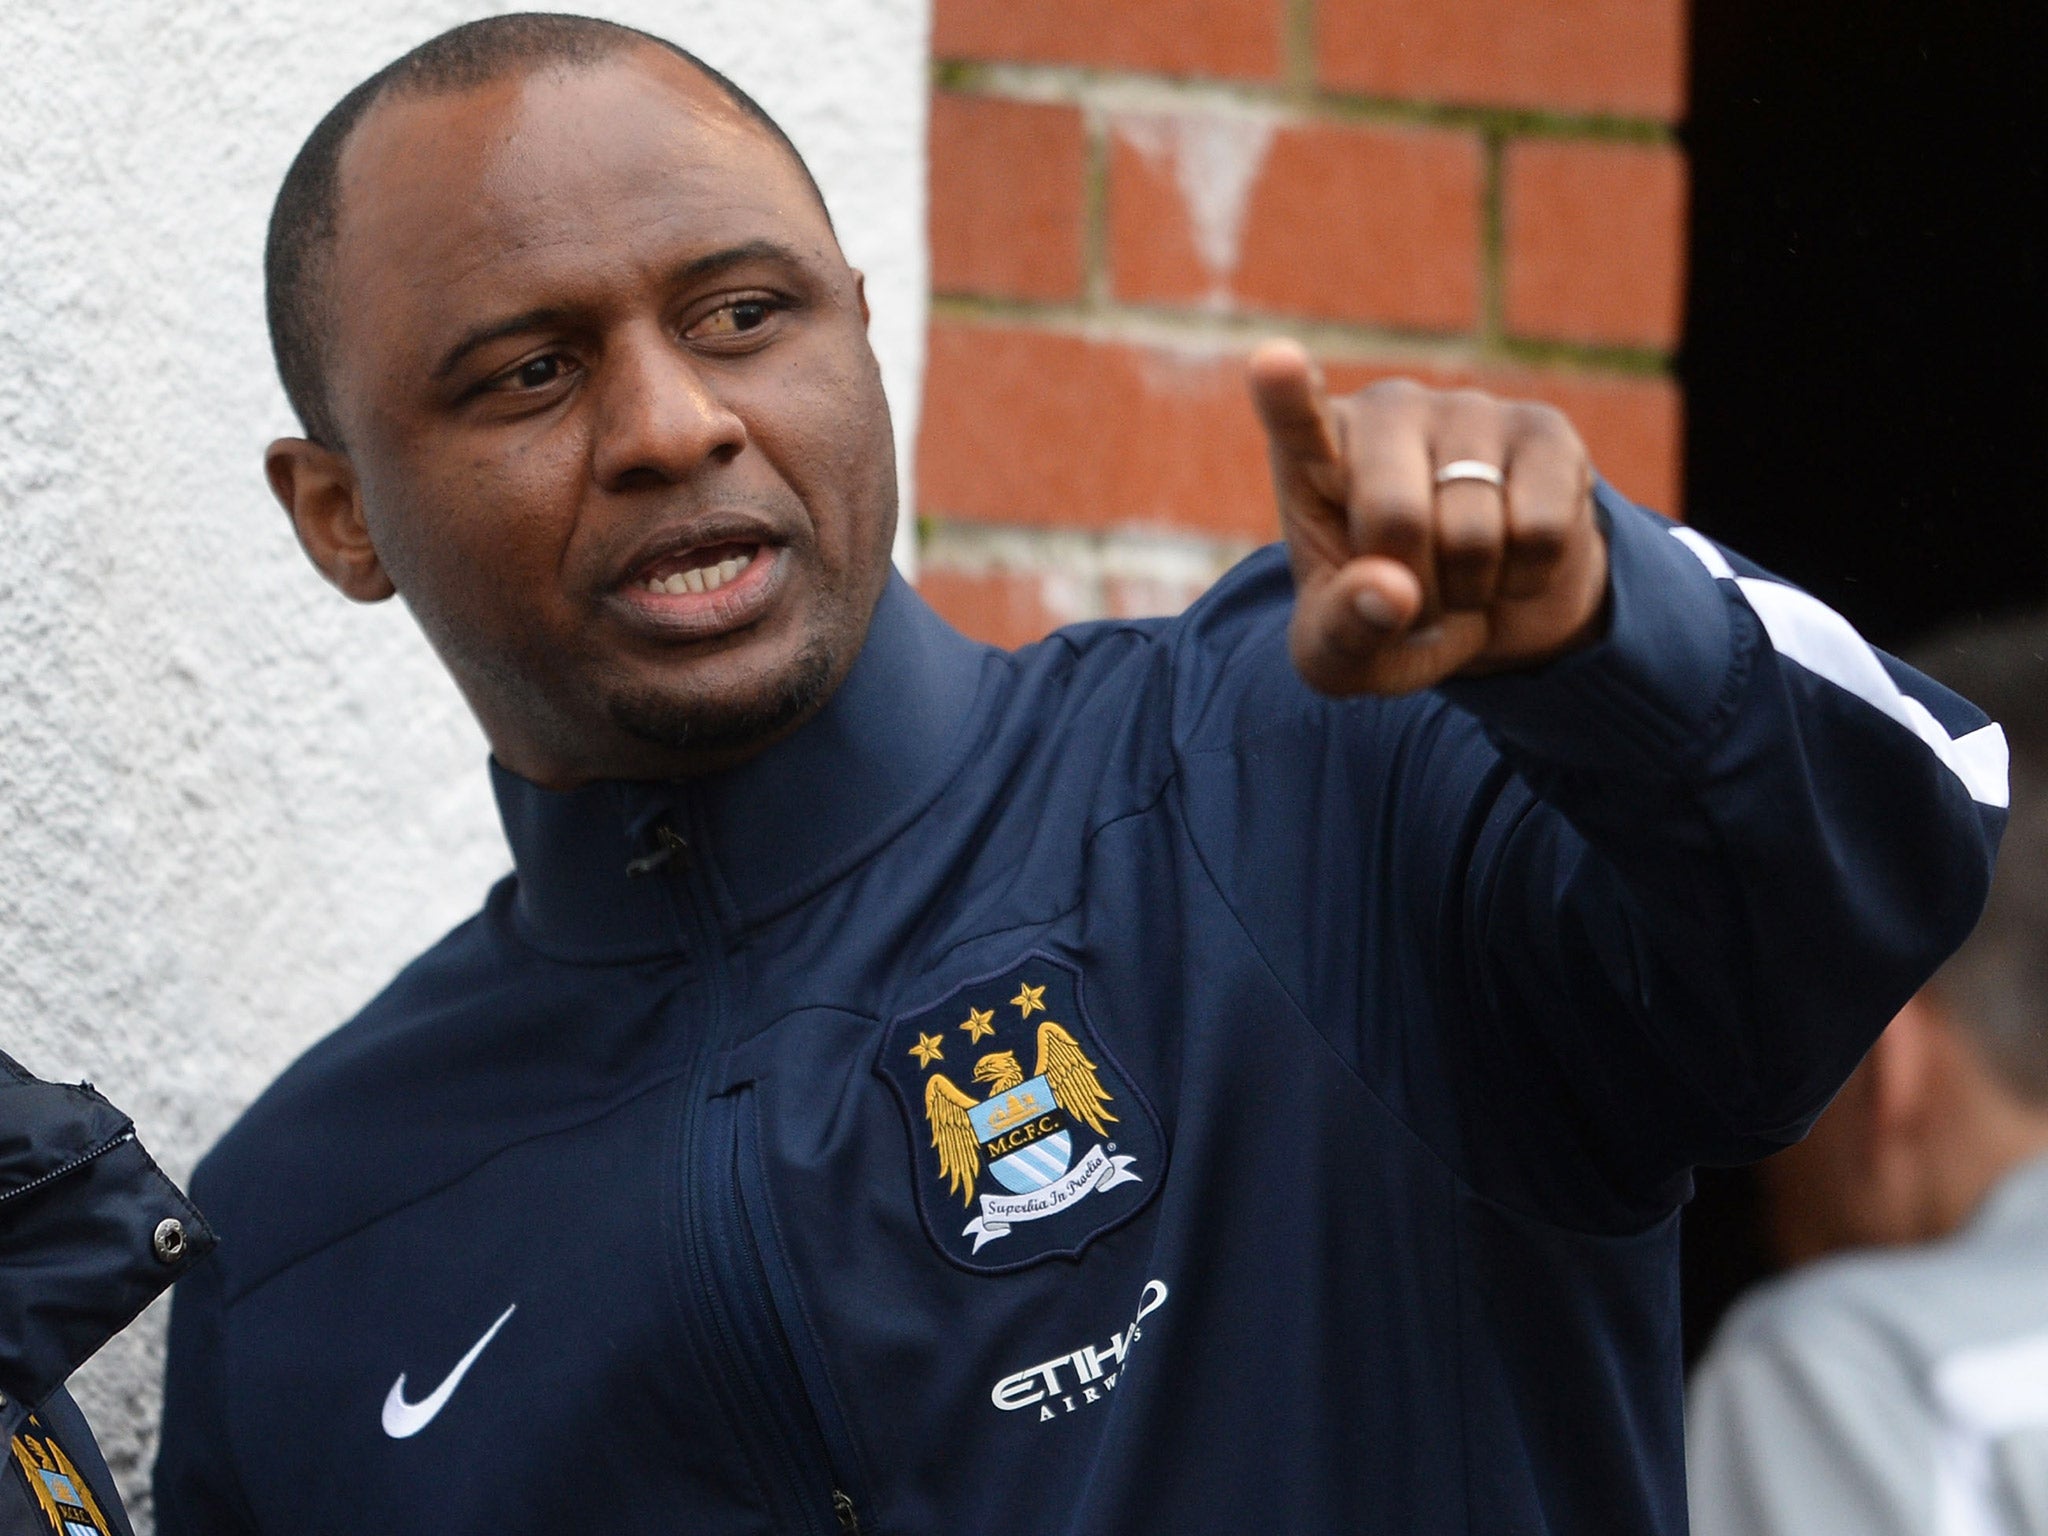 Patrick Vieira is a youth coach at Manchester City